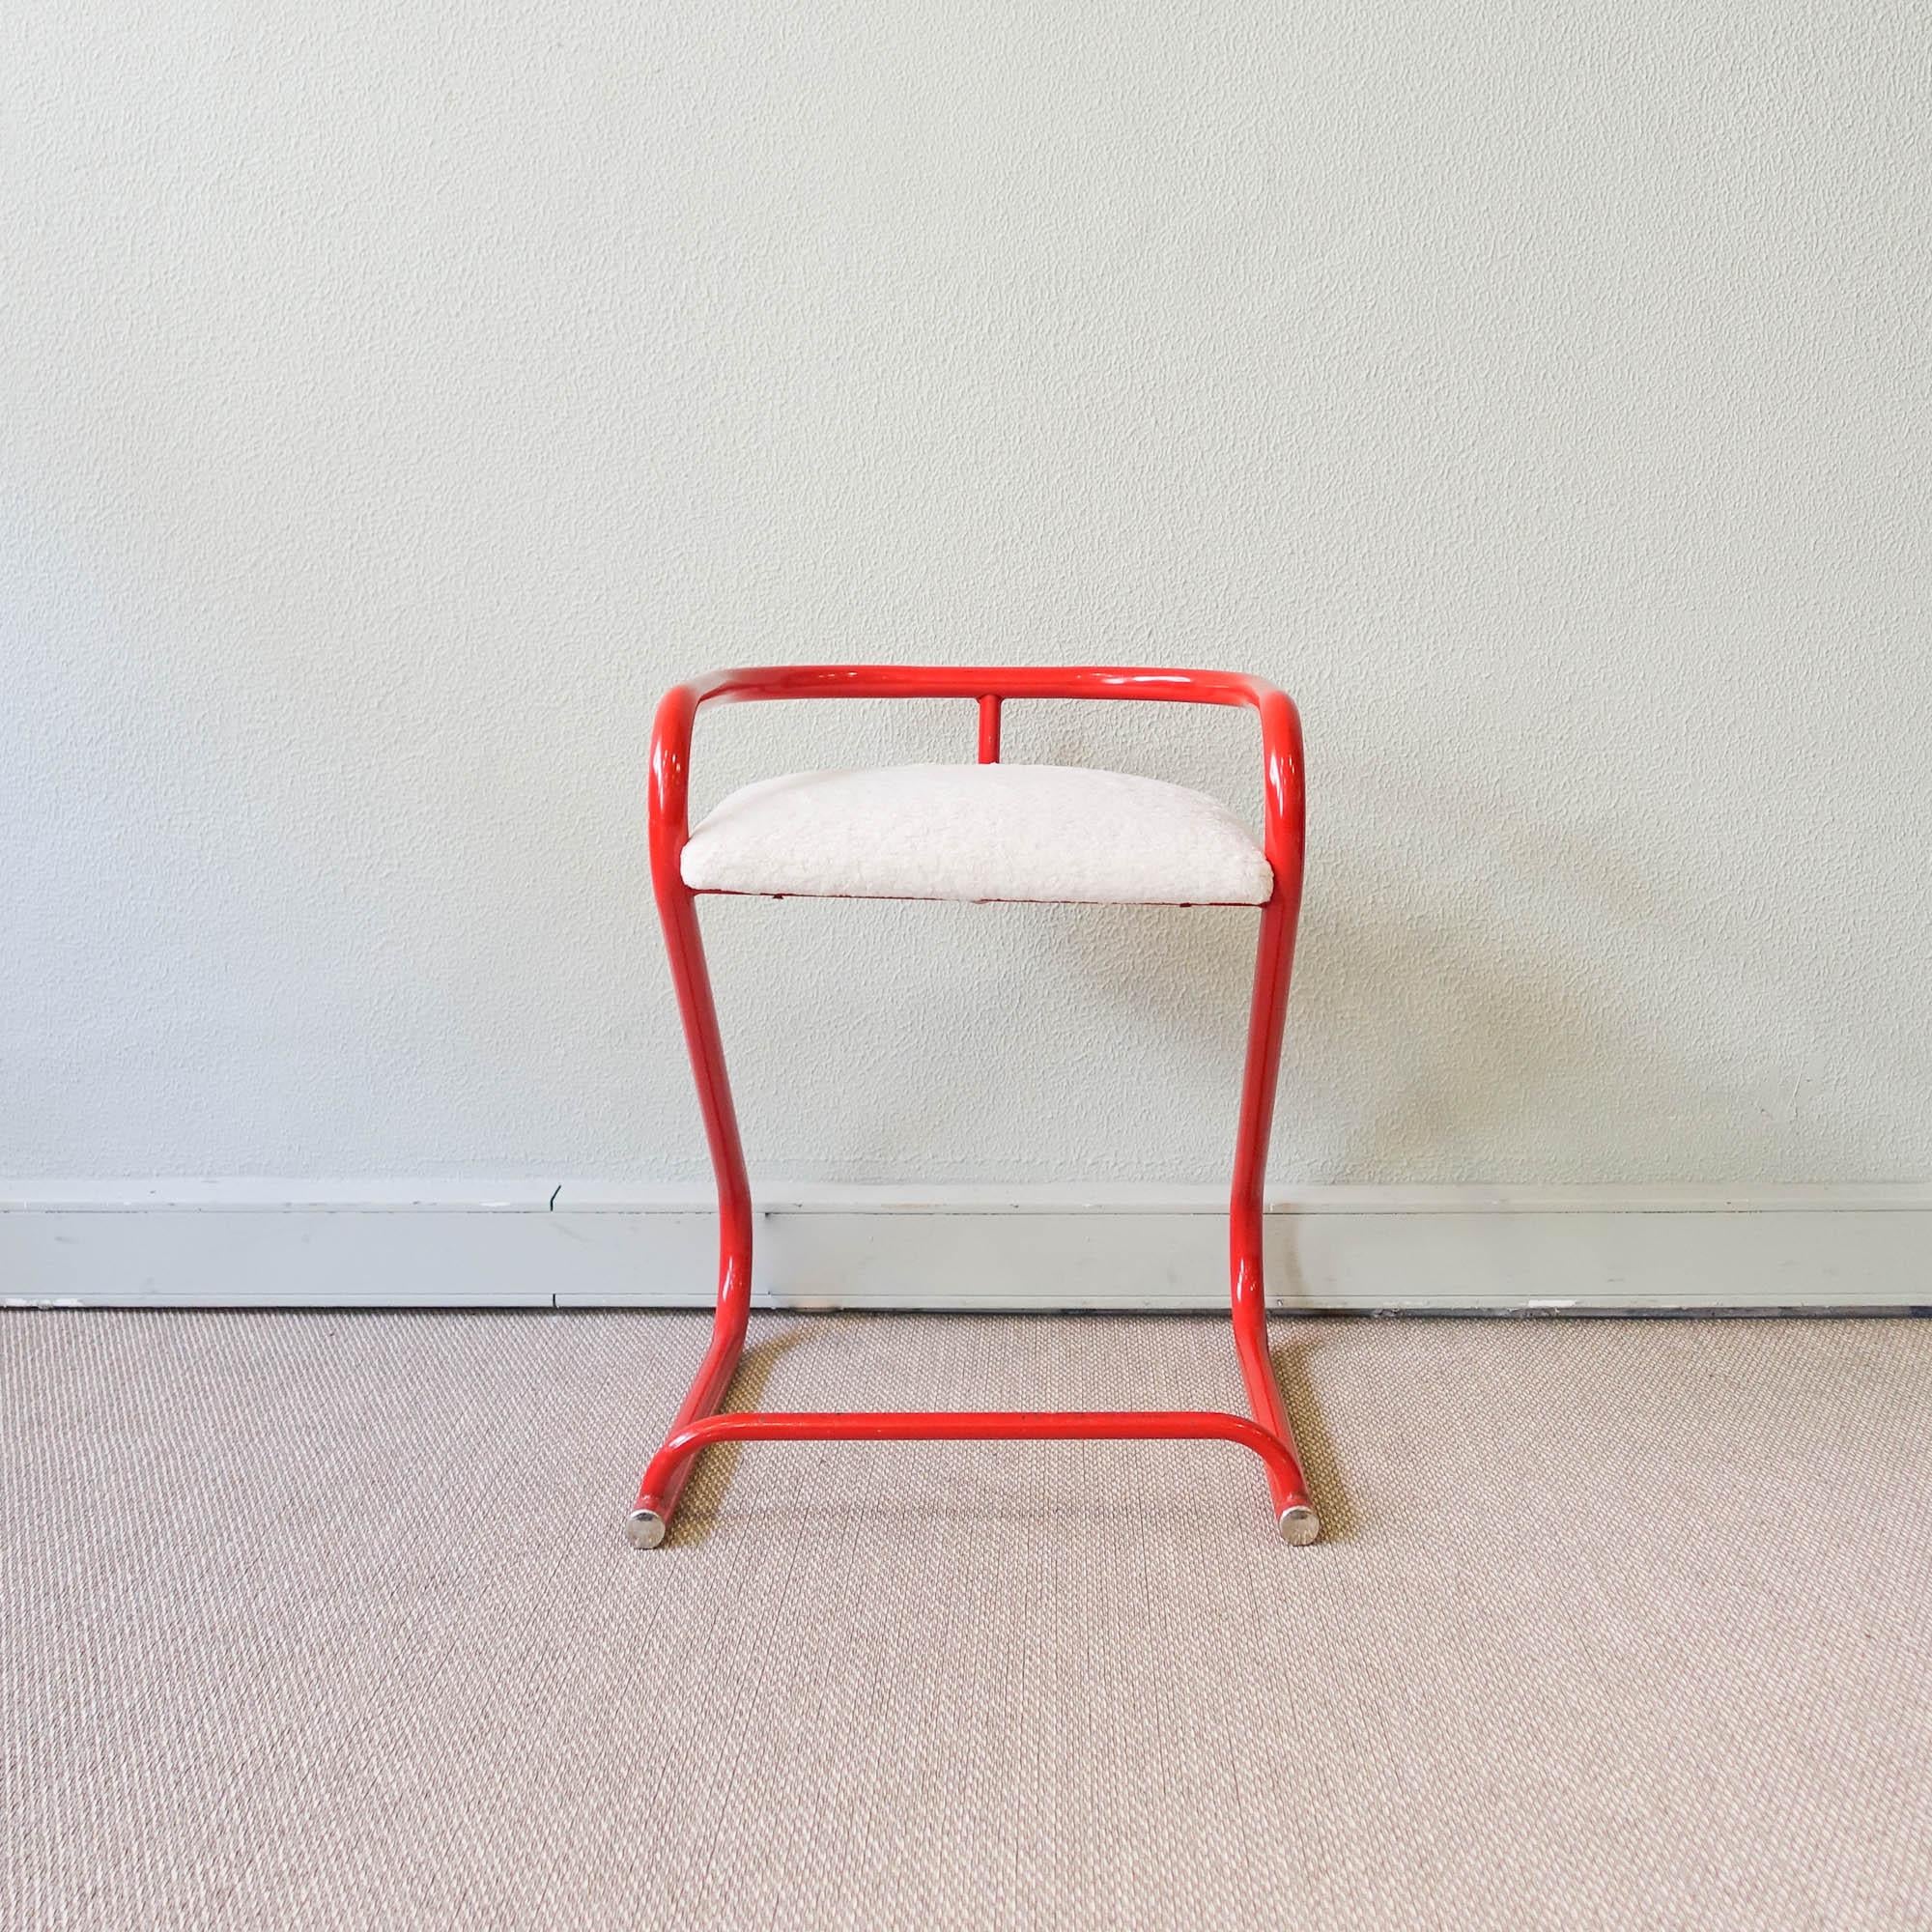 Late 20th Century Tubular Steel “Z” Chair by Les Industries Amisco, 1970's For Sale